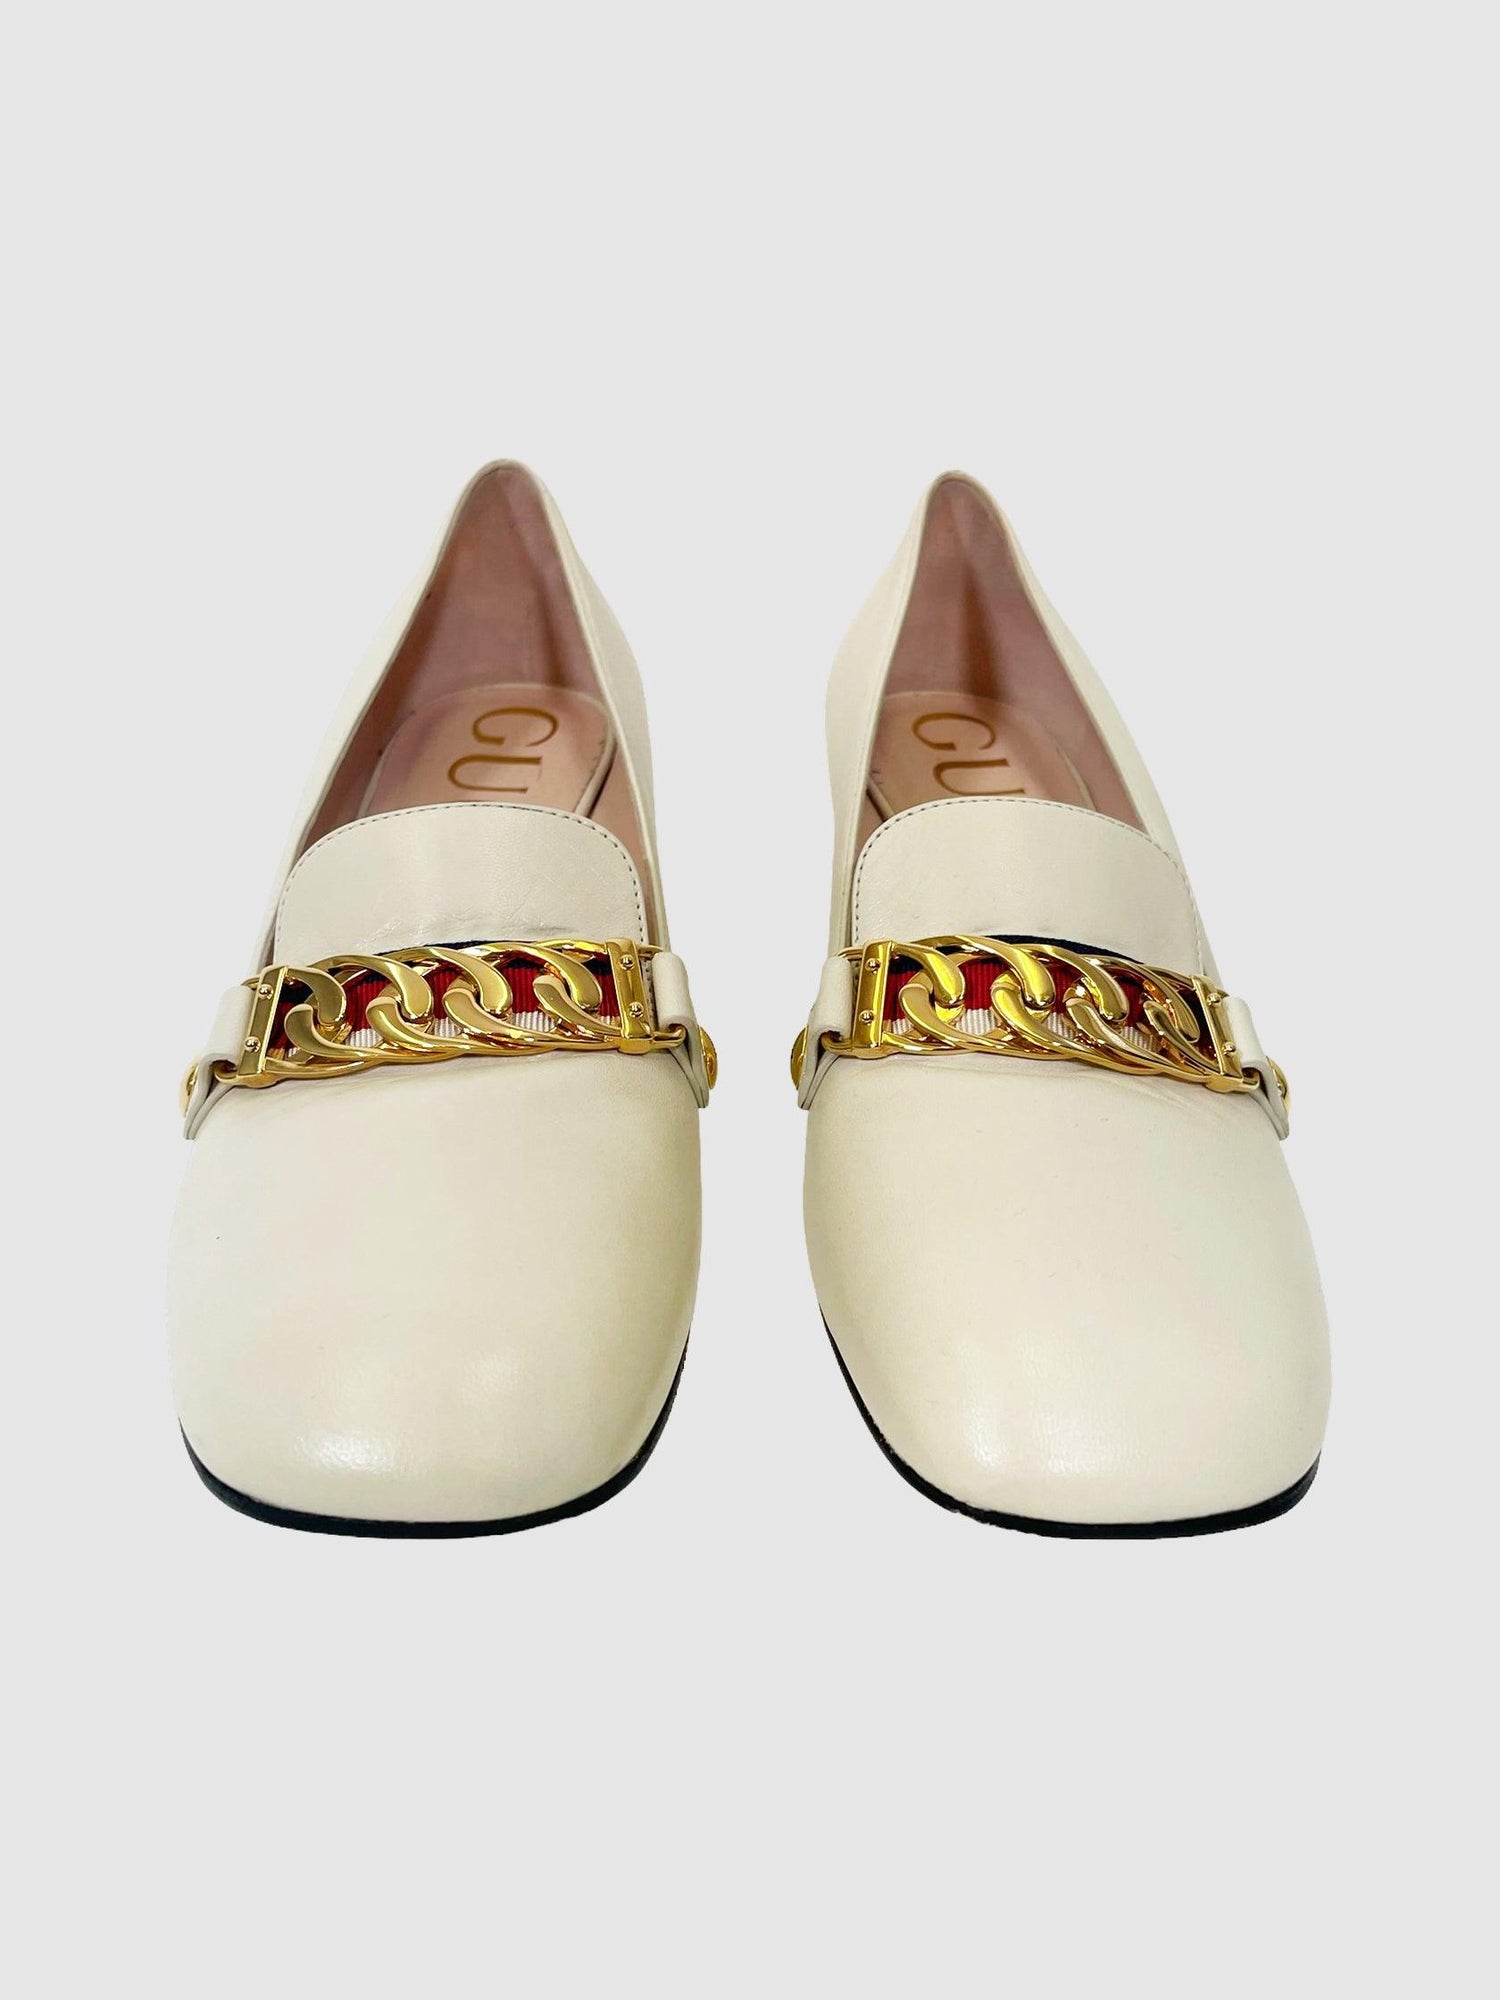 Gucci Beige Loafers - Size 38.5 - Second Nature Boutique